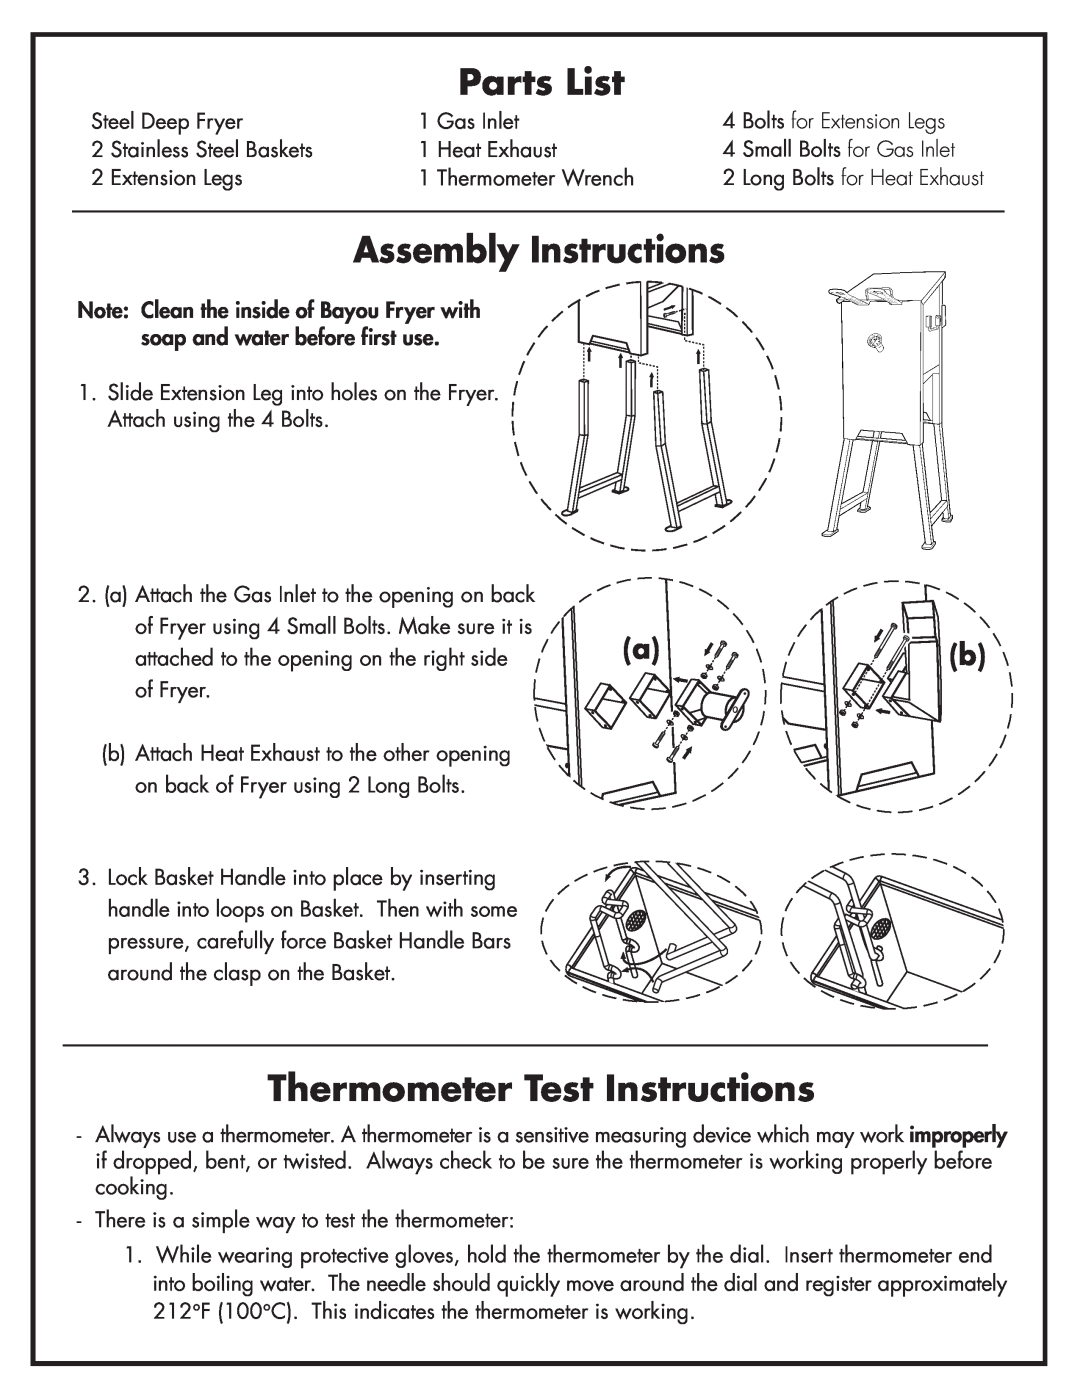 Bayou Classic 700-701 manual Parts List, Assembly Instructions, Thermometer Test Instructions 